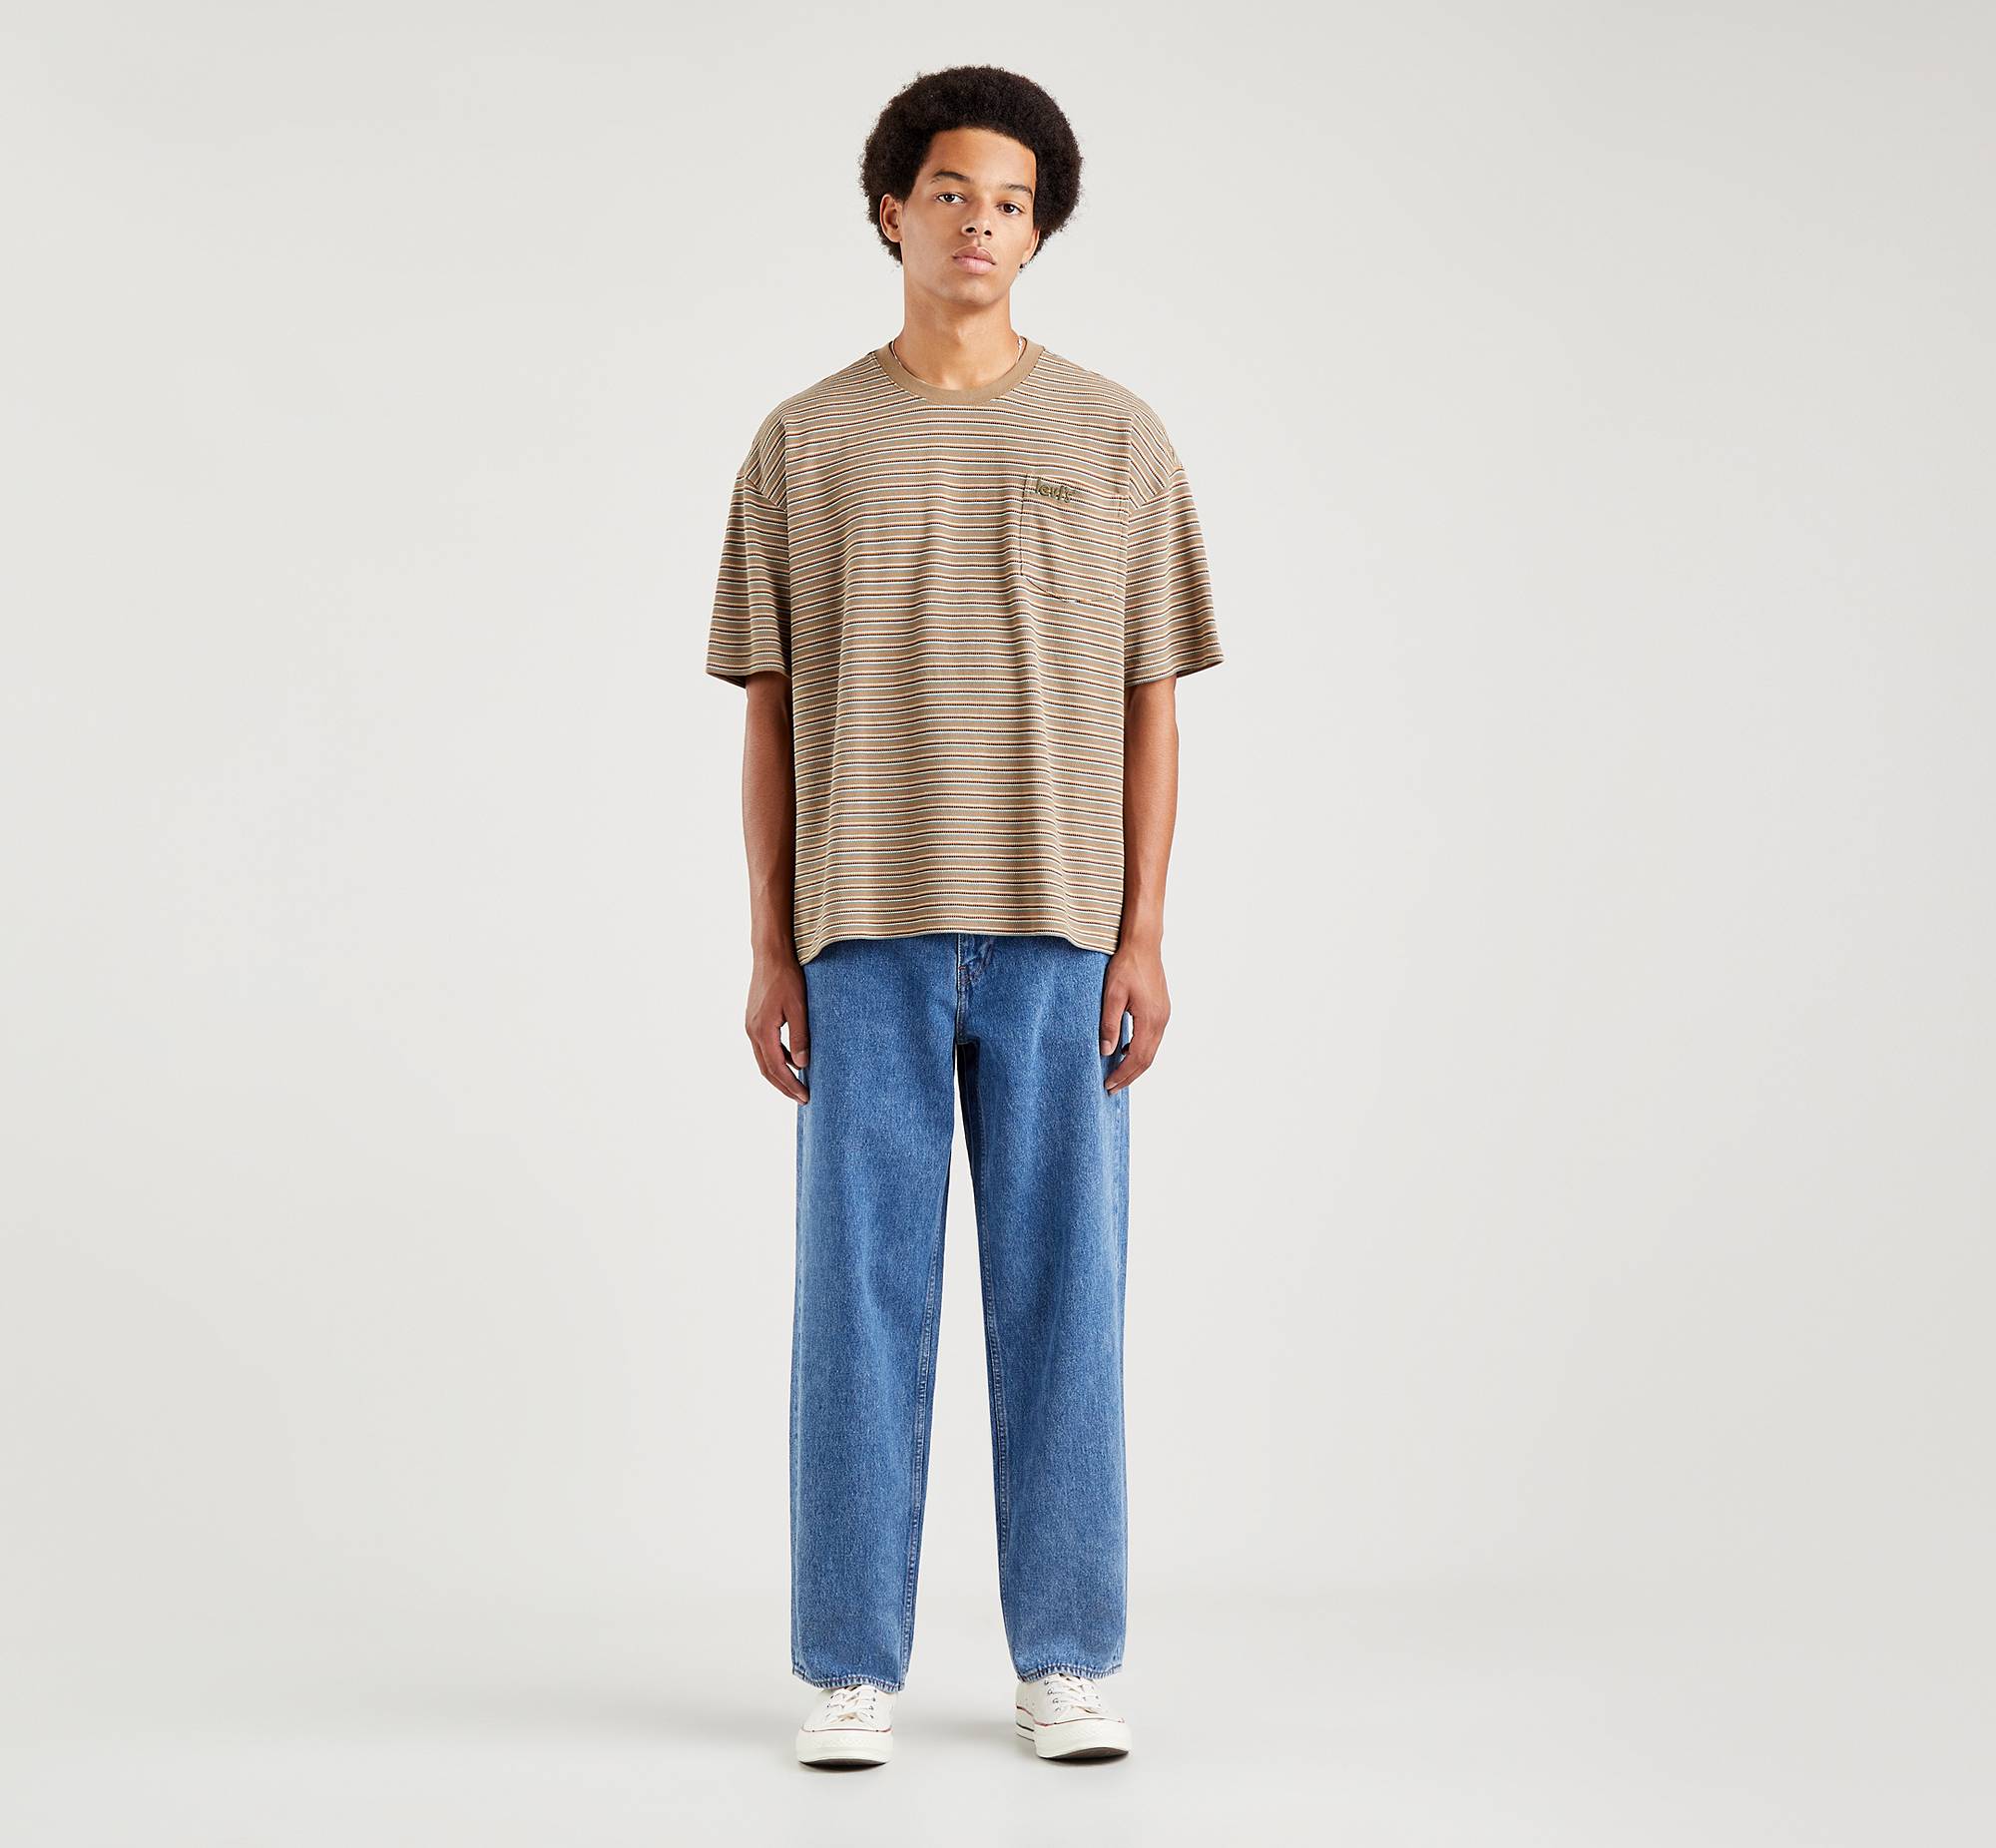 Stay Baggy Tapered Jeans 5